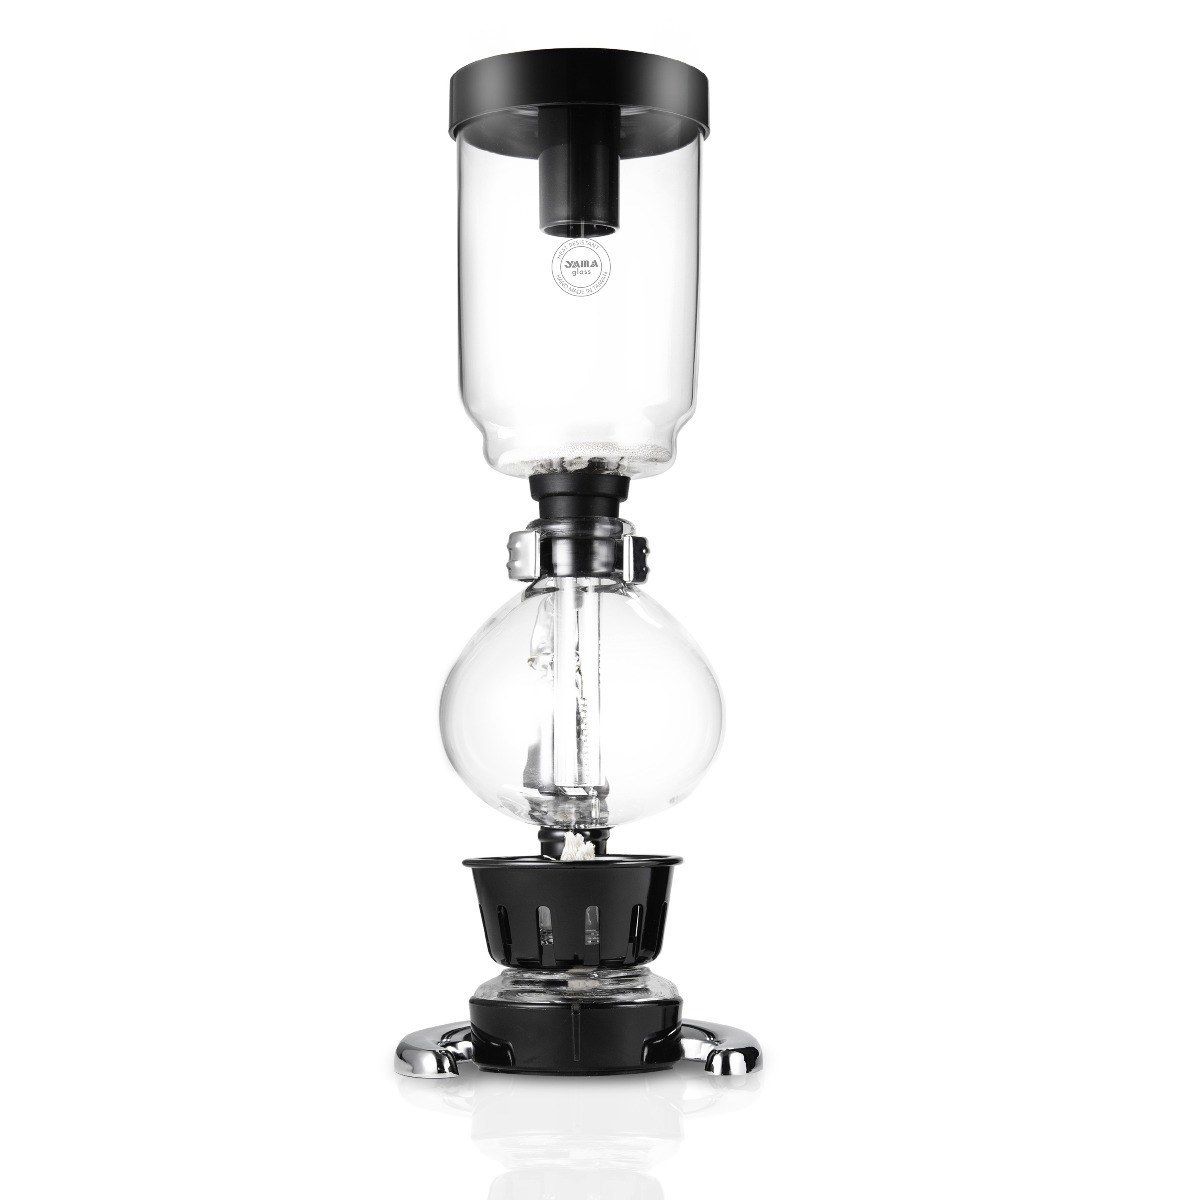 3-Cup Siphon Syphon Coffee Maker Manual Coffee Maker Tabletop